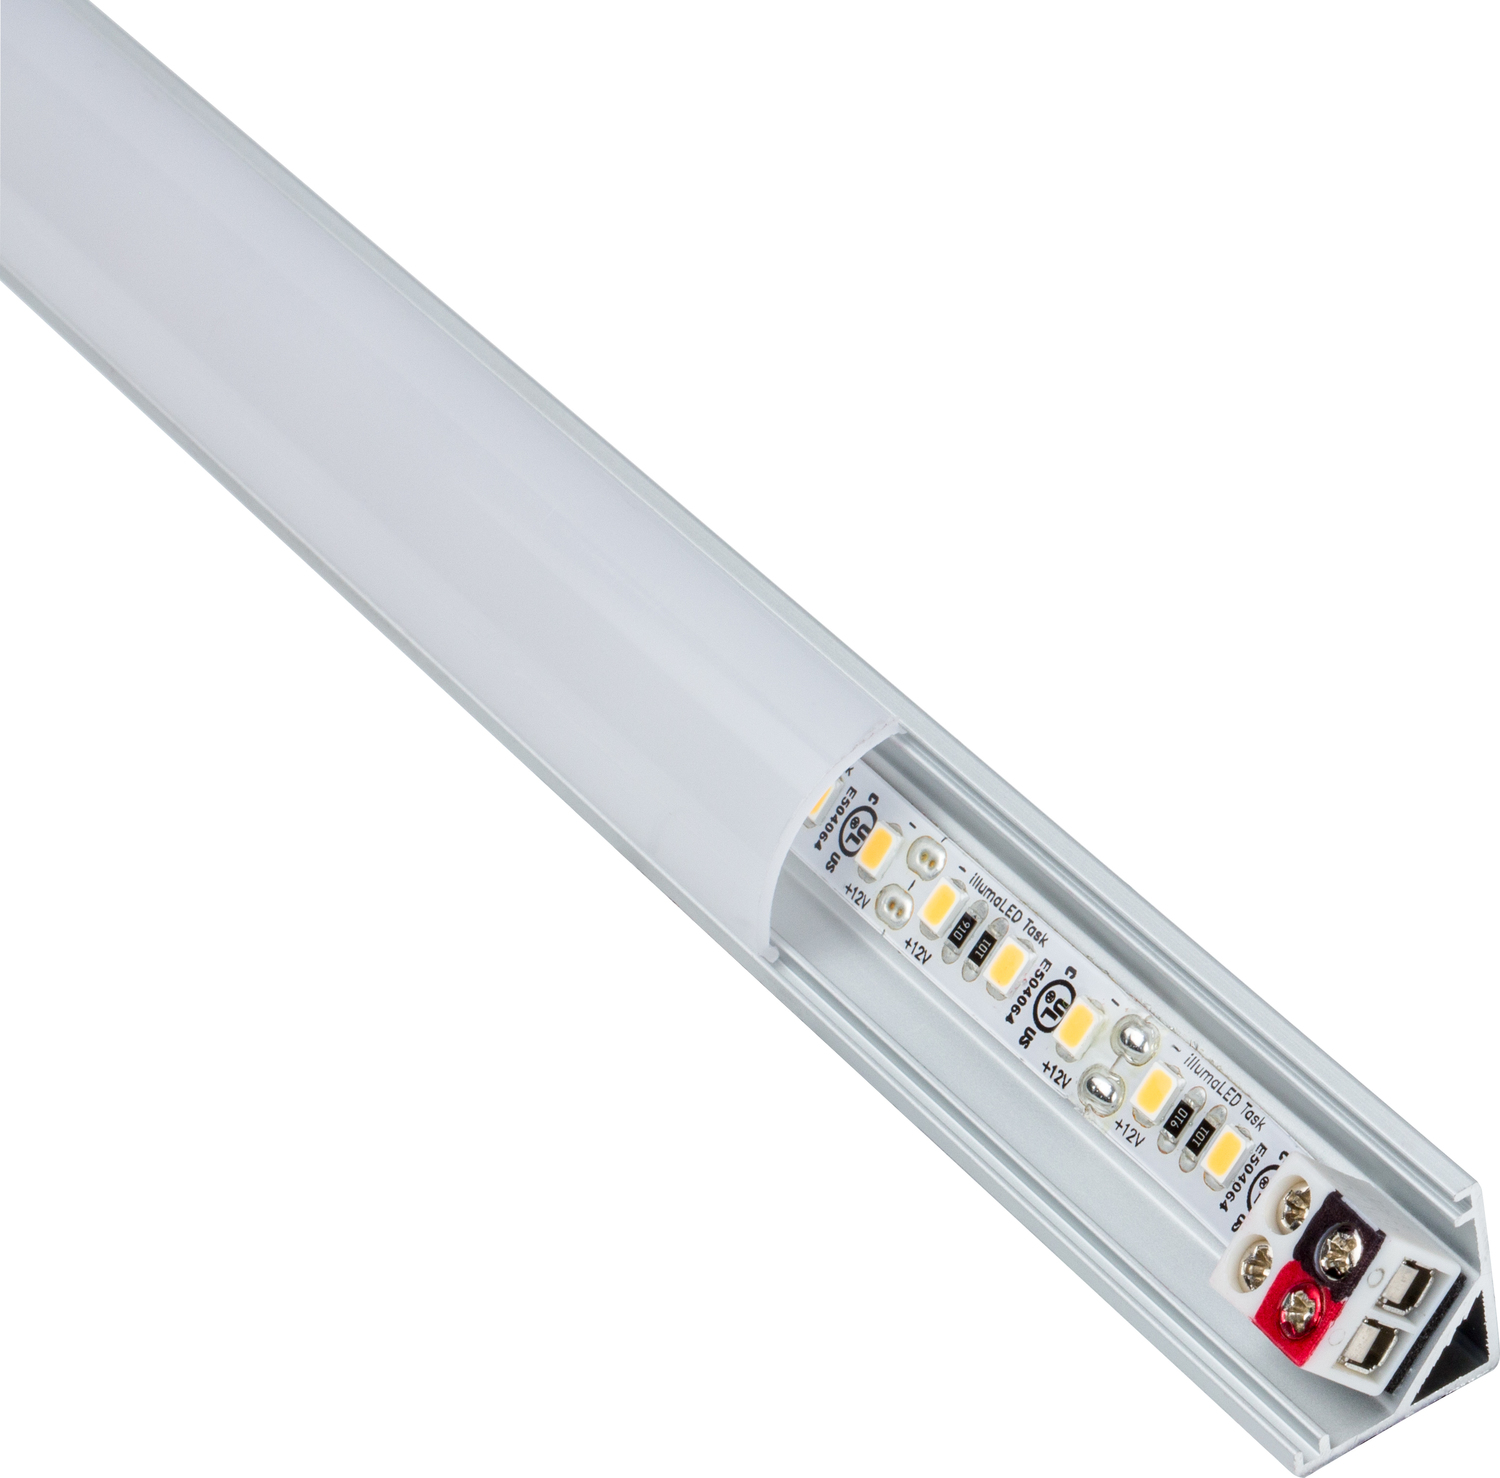 under cabinet lighting strips with remote Task Lighting Linear Fixtures;Single-white Lighting Aluminum